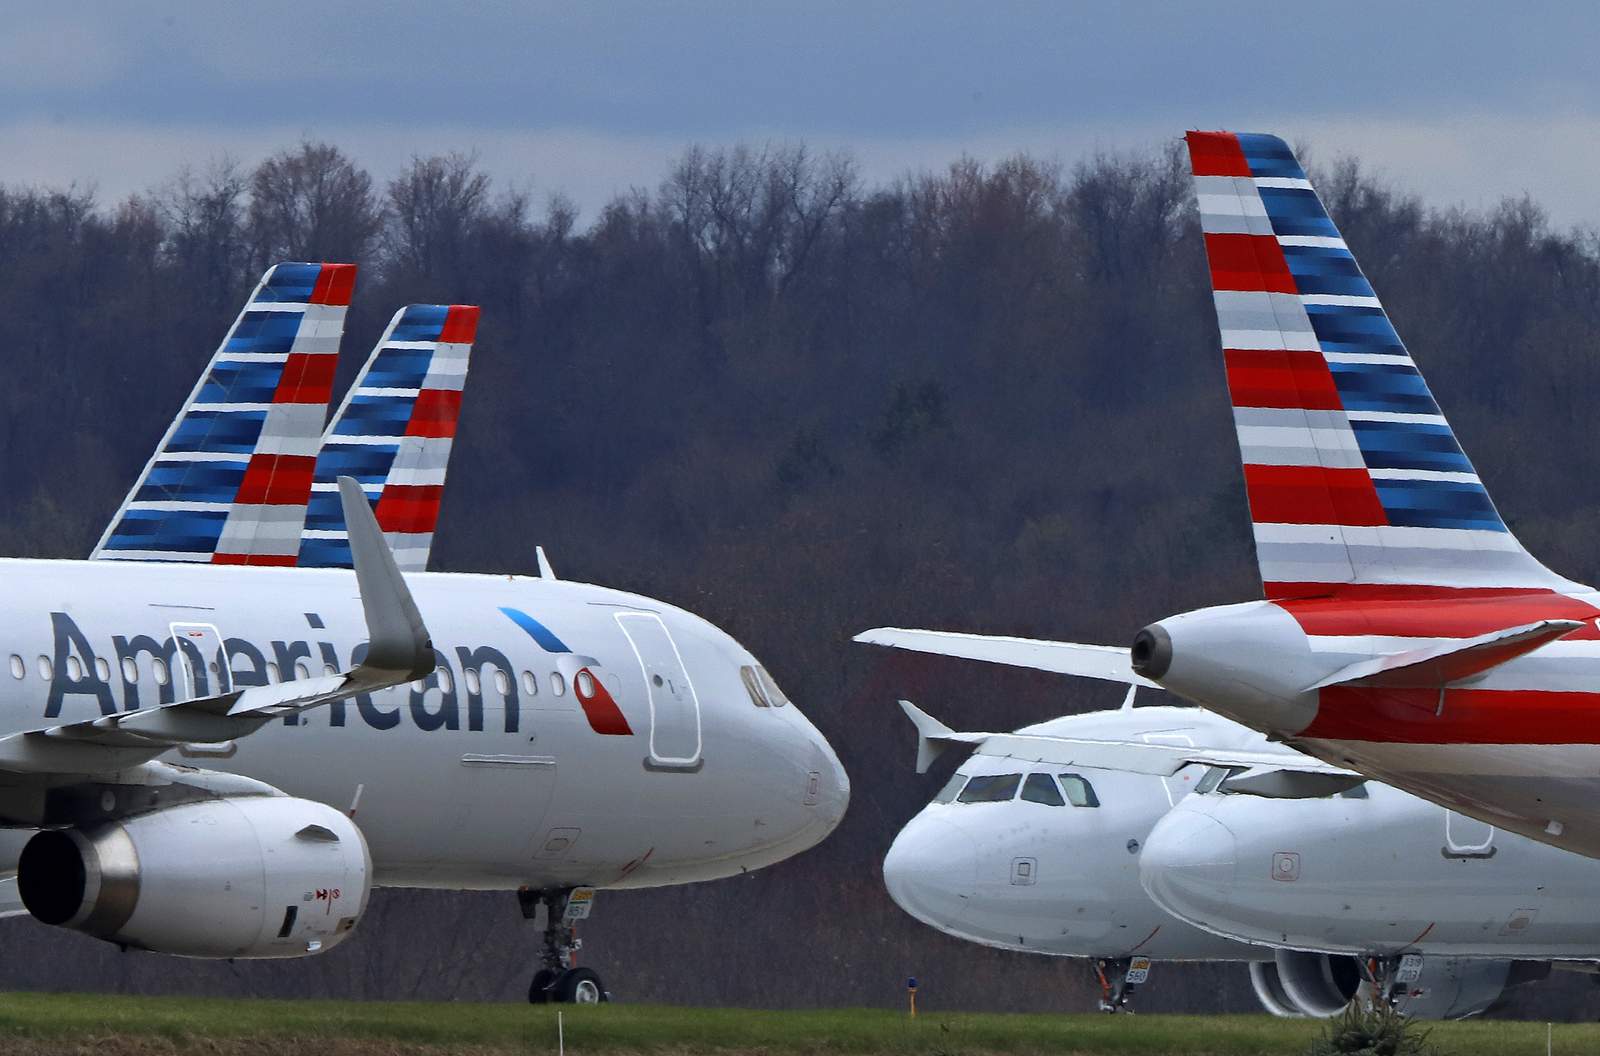 American Airlines will book flights to full capacity